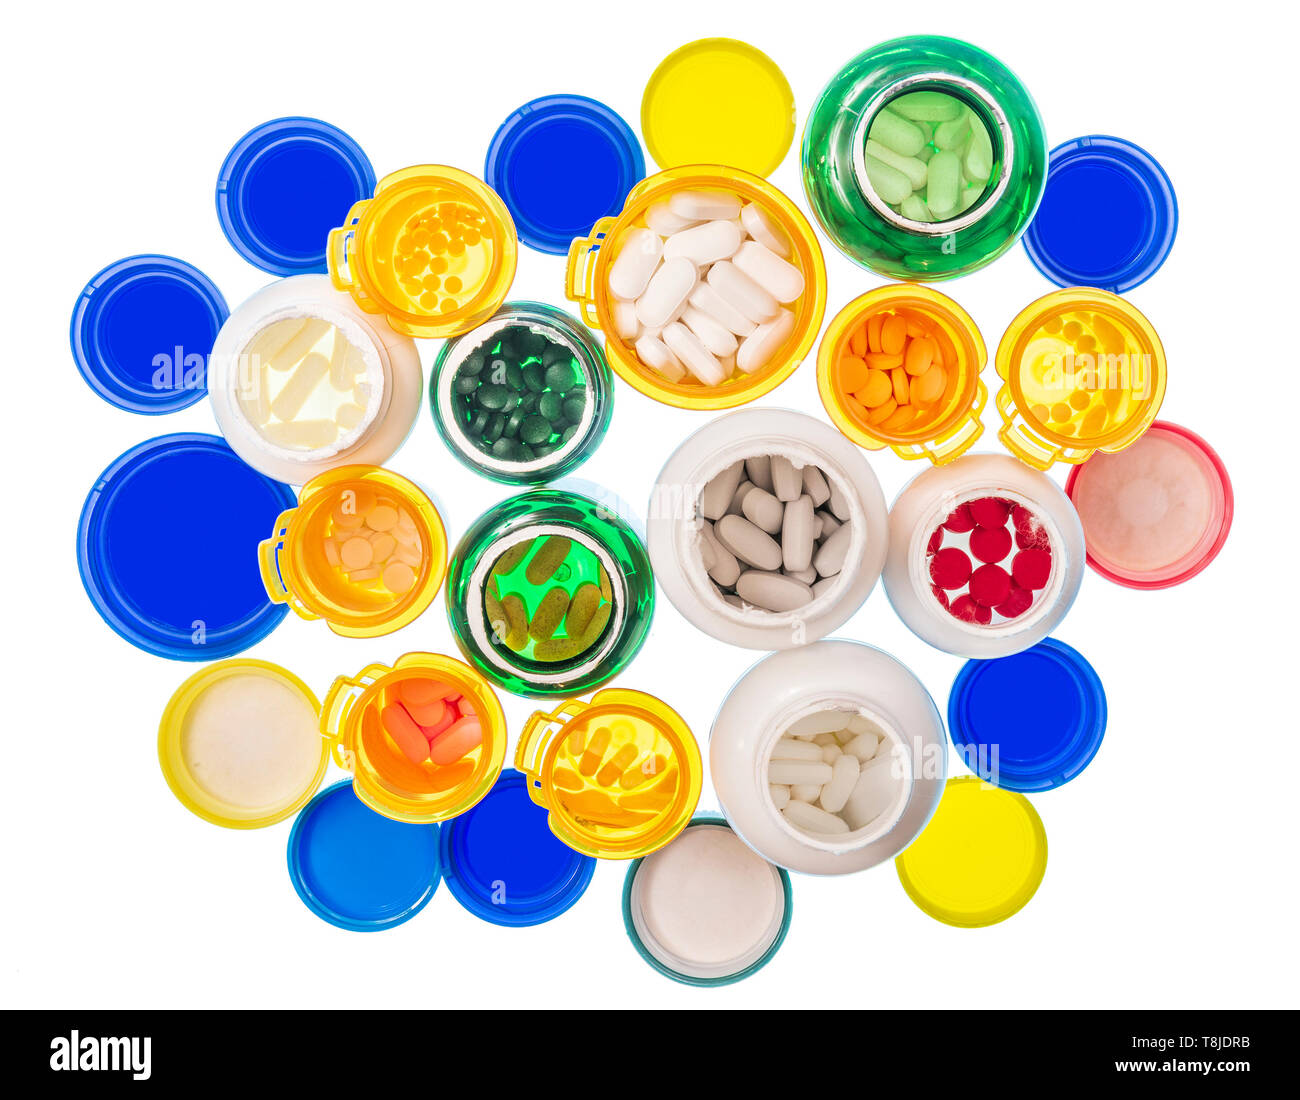 Horizontal shot looking down at a large group of various sizes and colors of pill bottles filled with pills.  Bottles and lids are on a light table. W Stock Photo